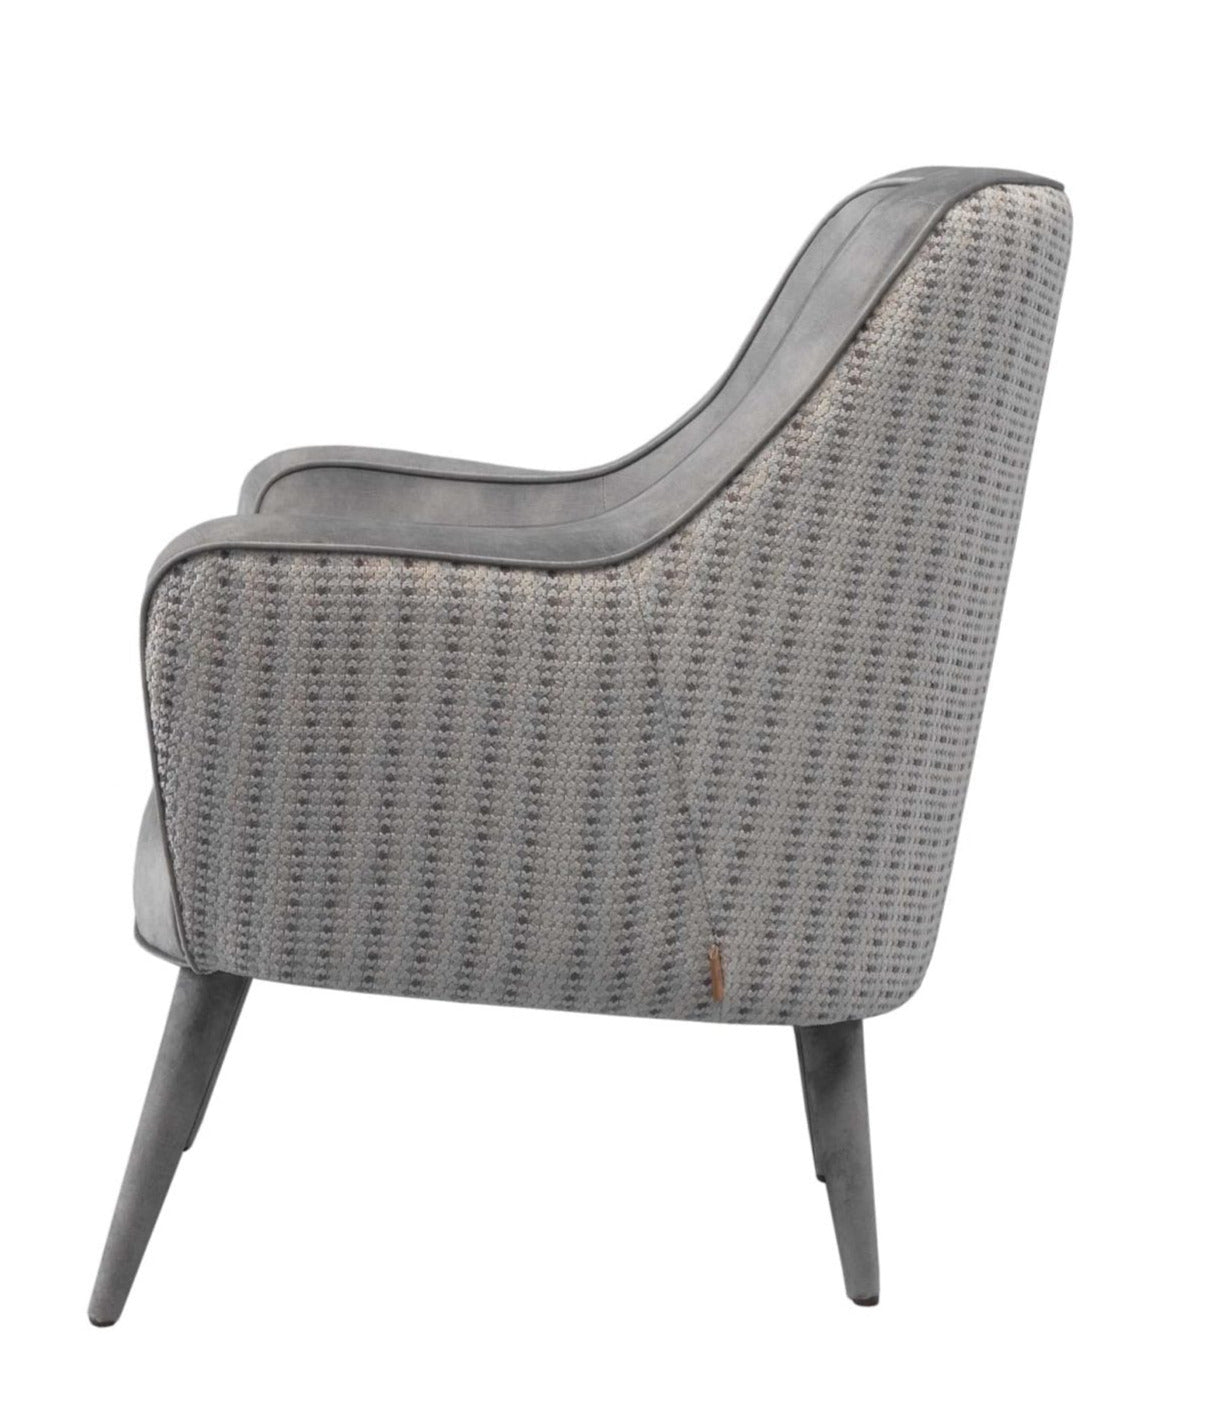 Grey velvet and patterned fabric armchair